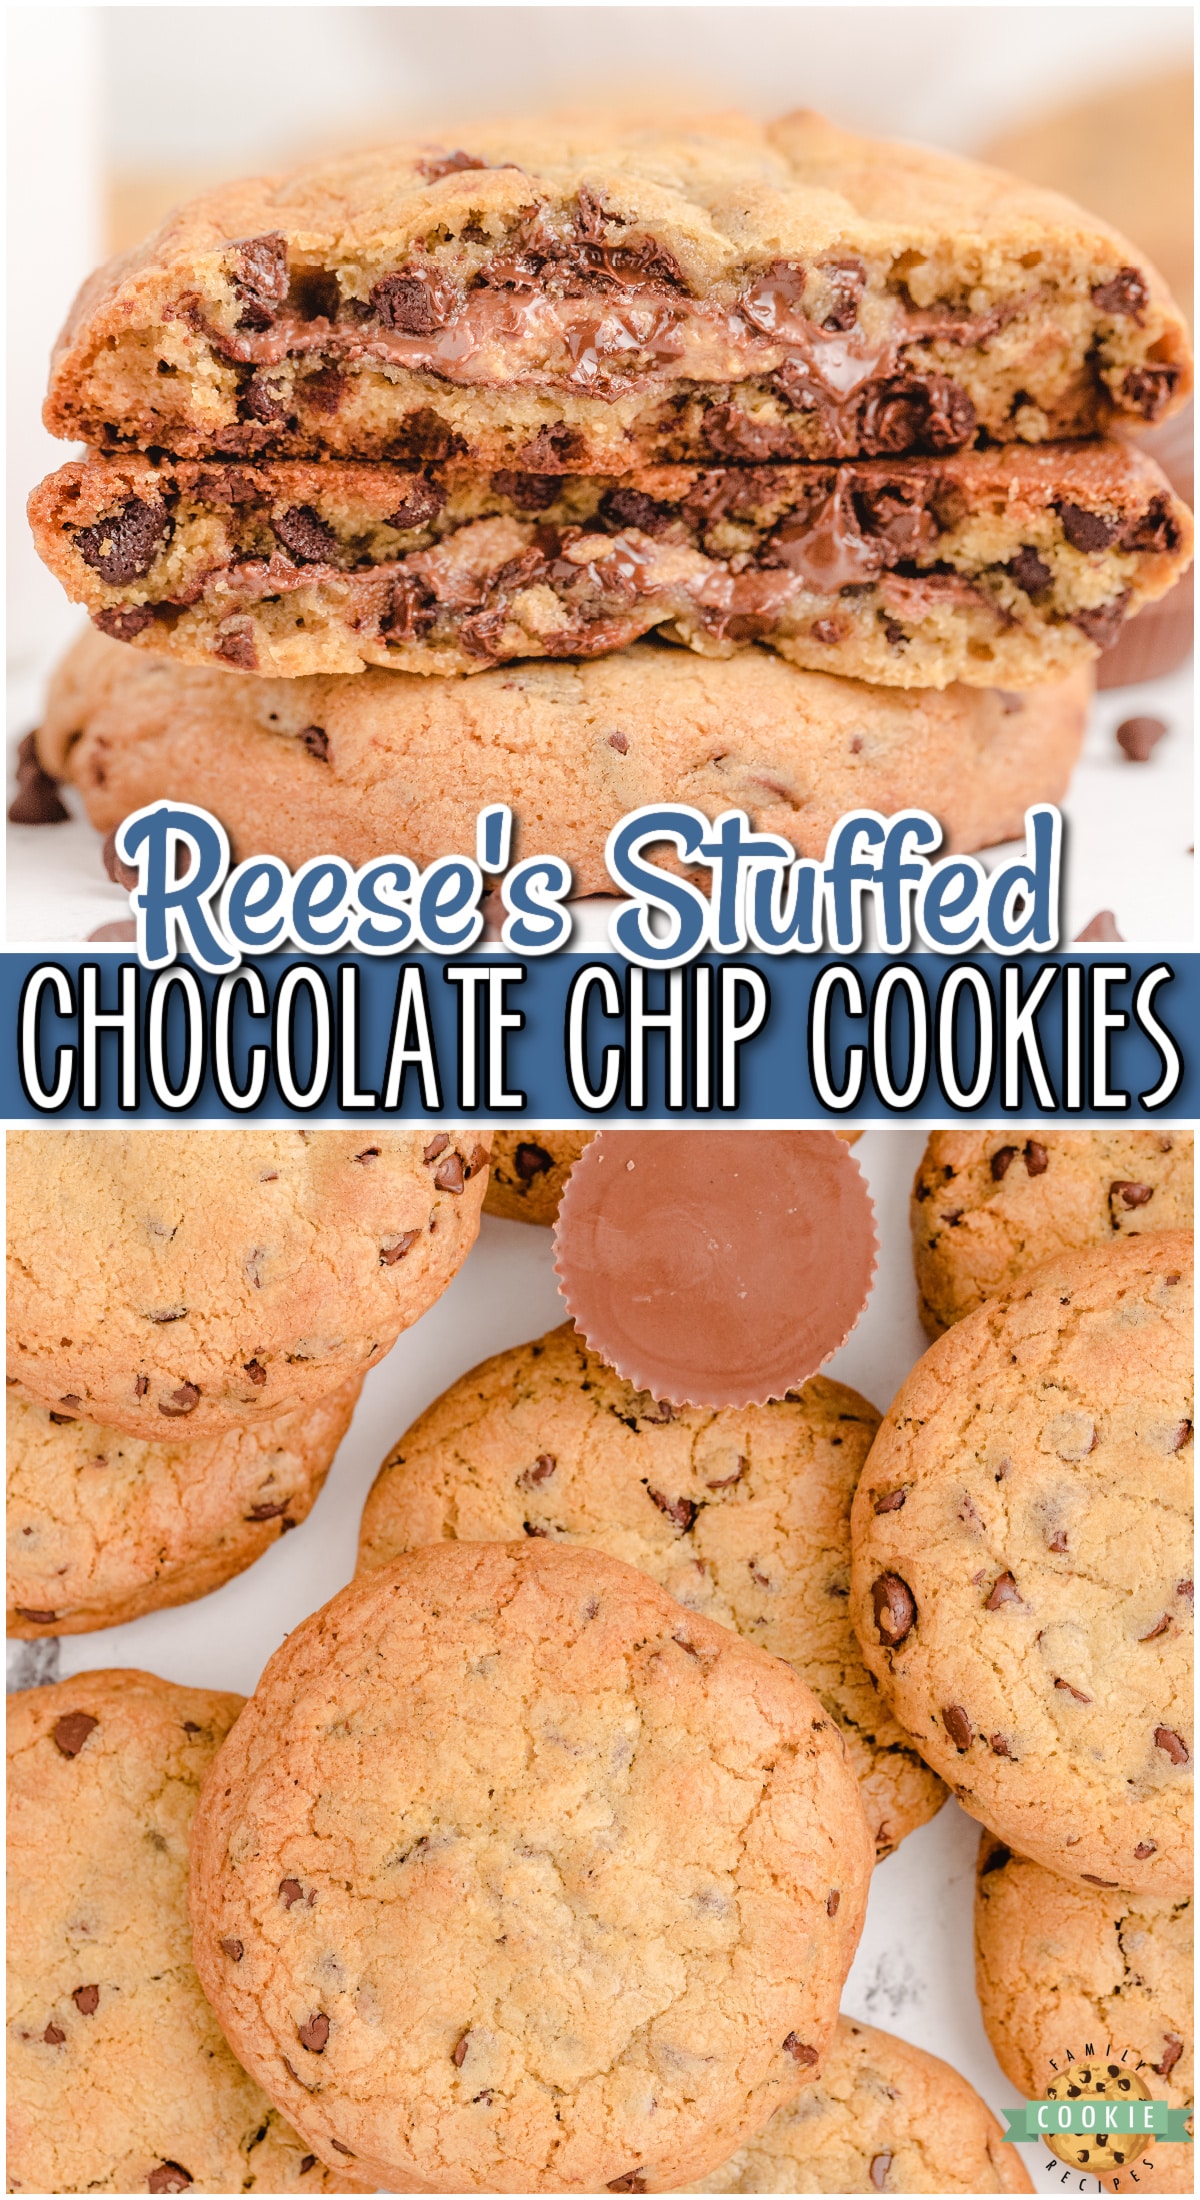 Chocolate Chip Cookies stuffed with a Reese's Peanut Butter Cup for the ultimate cookie treat! Classic cookies with a fun twist for anyone who loves peanut butter + chocolate!